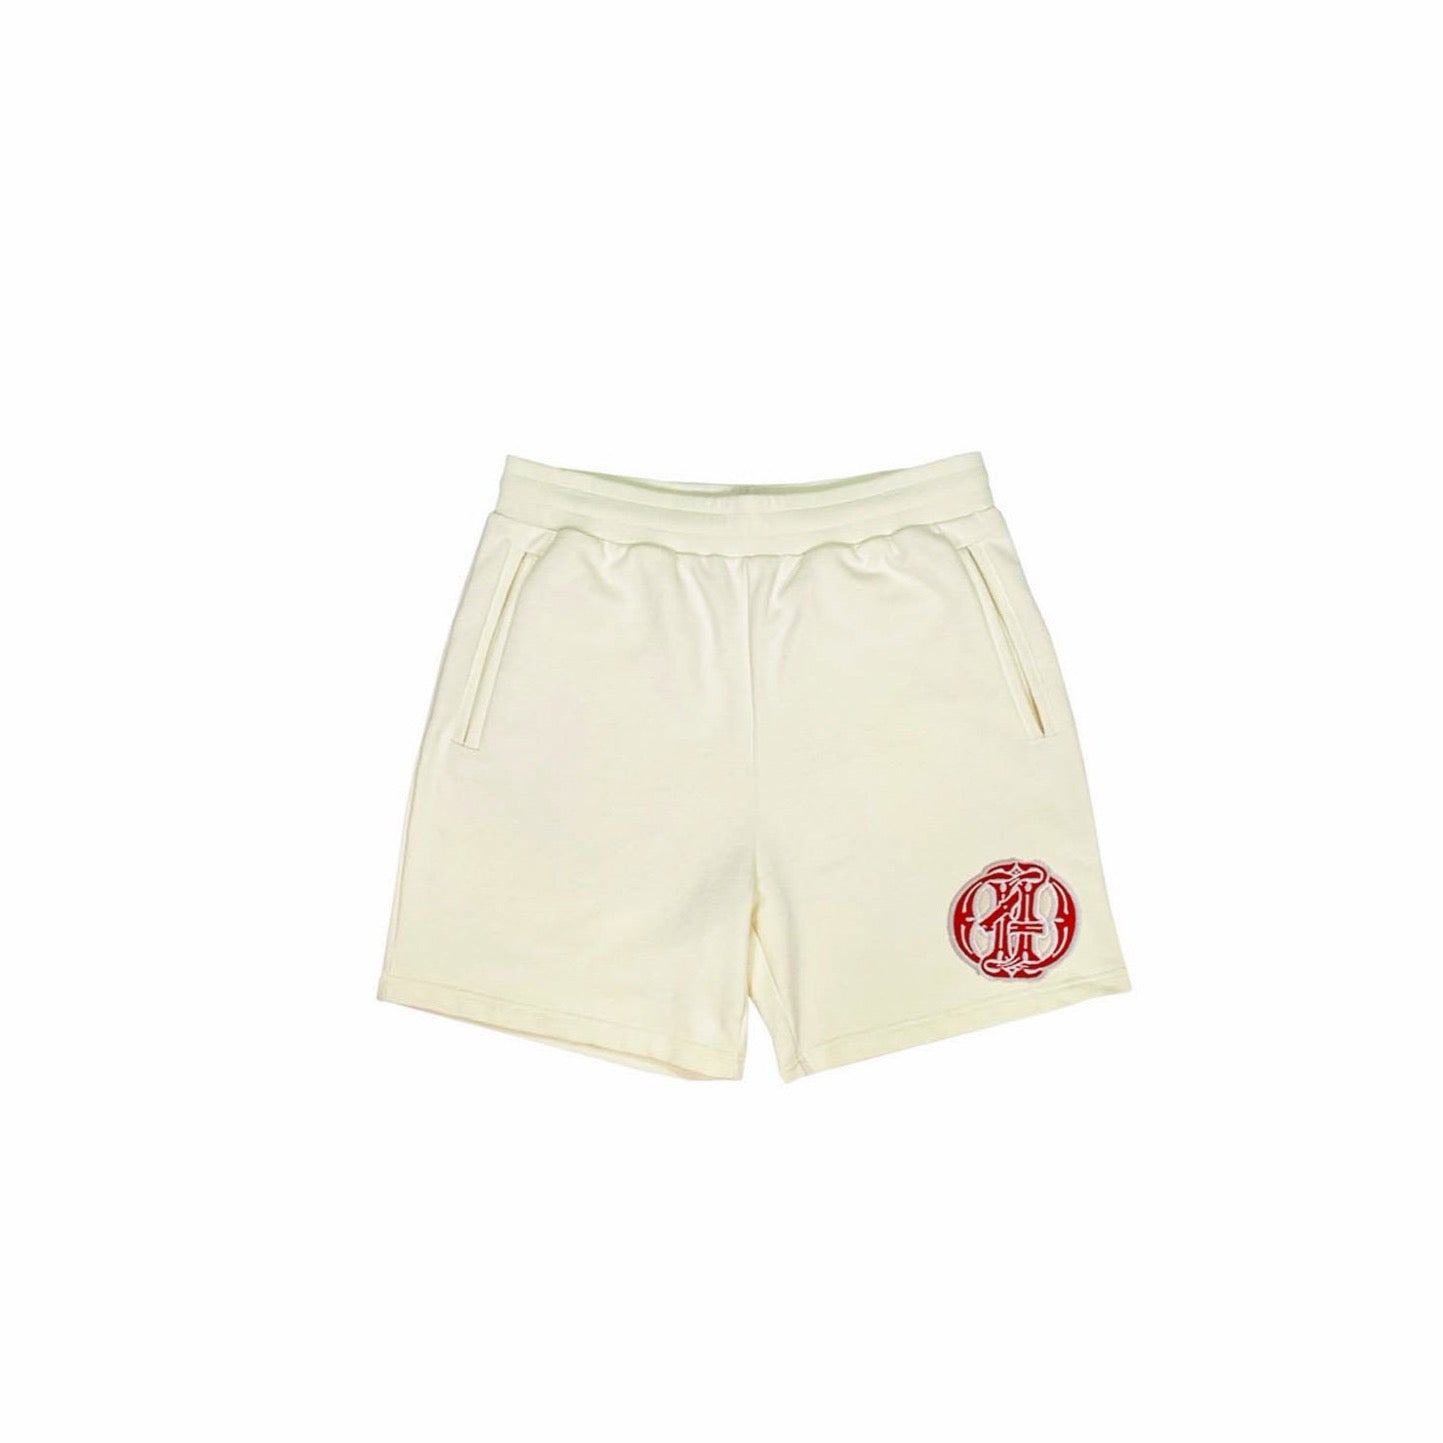 Monogram French Terry Lux Cream Shorts - Death4Dollars